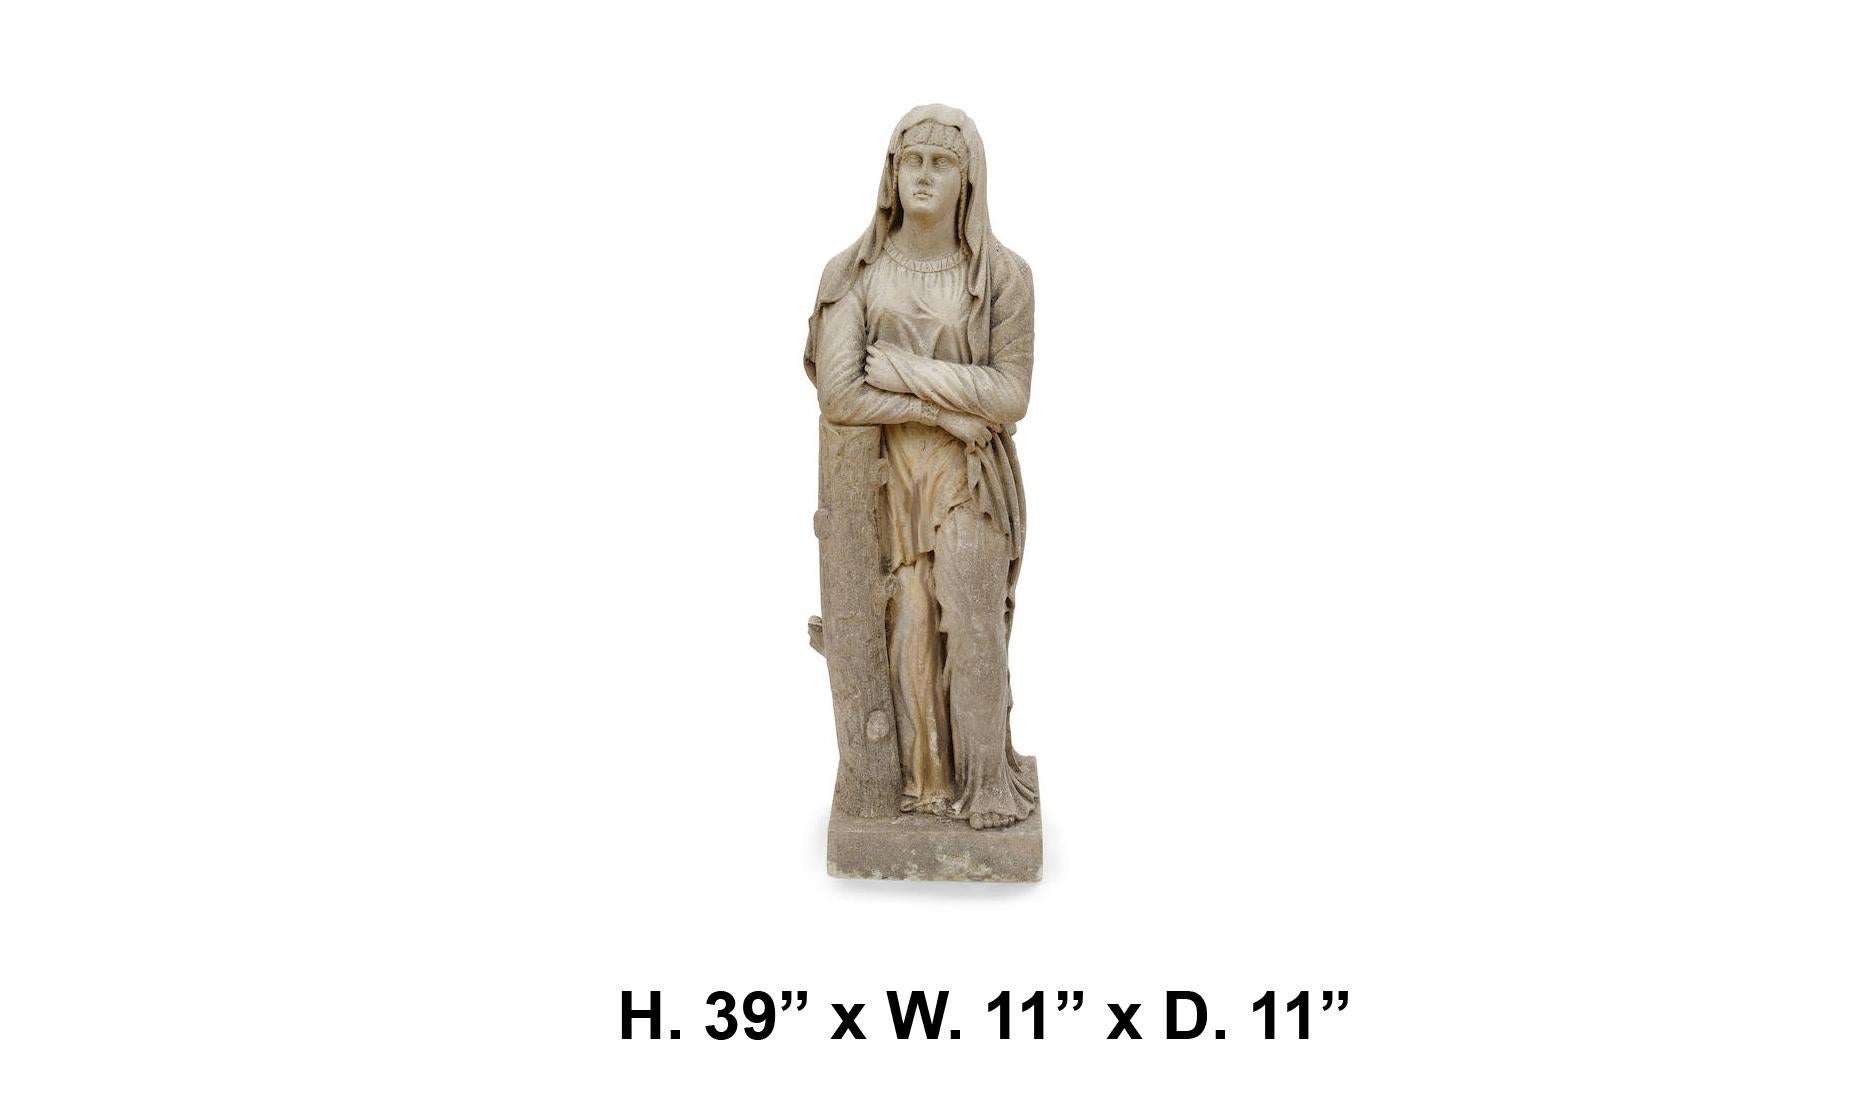 A exquisite Medieval style hand-carved stone garden sculpture of a maiden dressed in Classical robes leaning on a tree stump, above a conforming base. 18century possible earlier.
Can be used for both interior and exterior purposes. 
Measures: H.